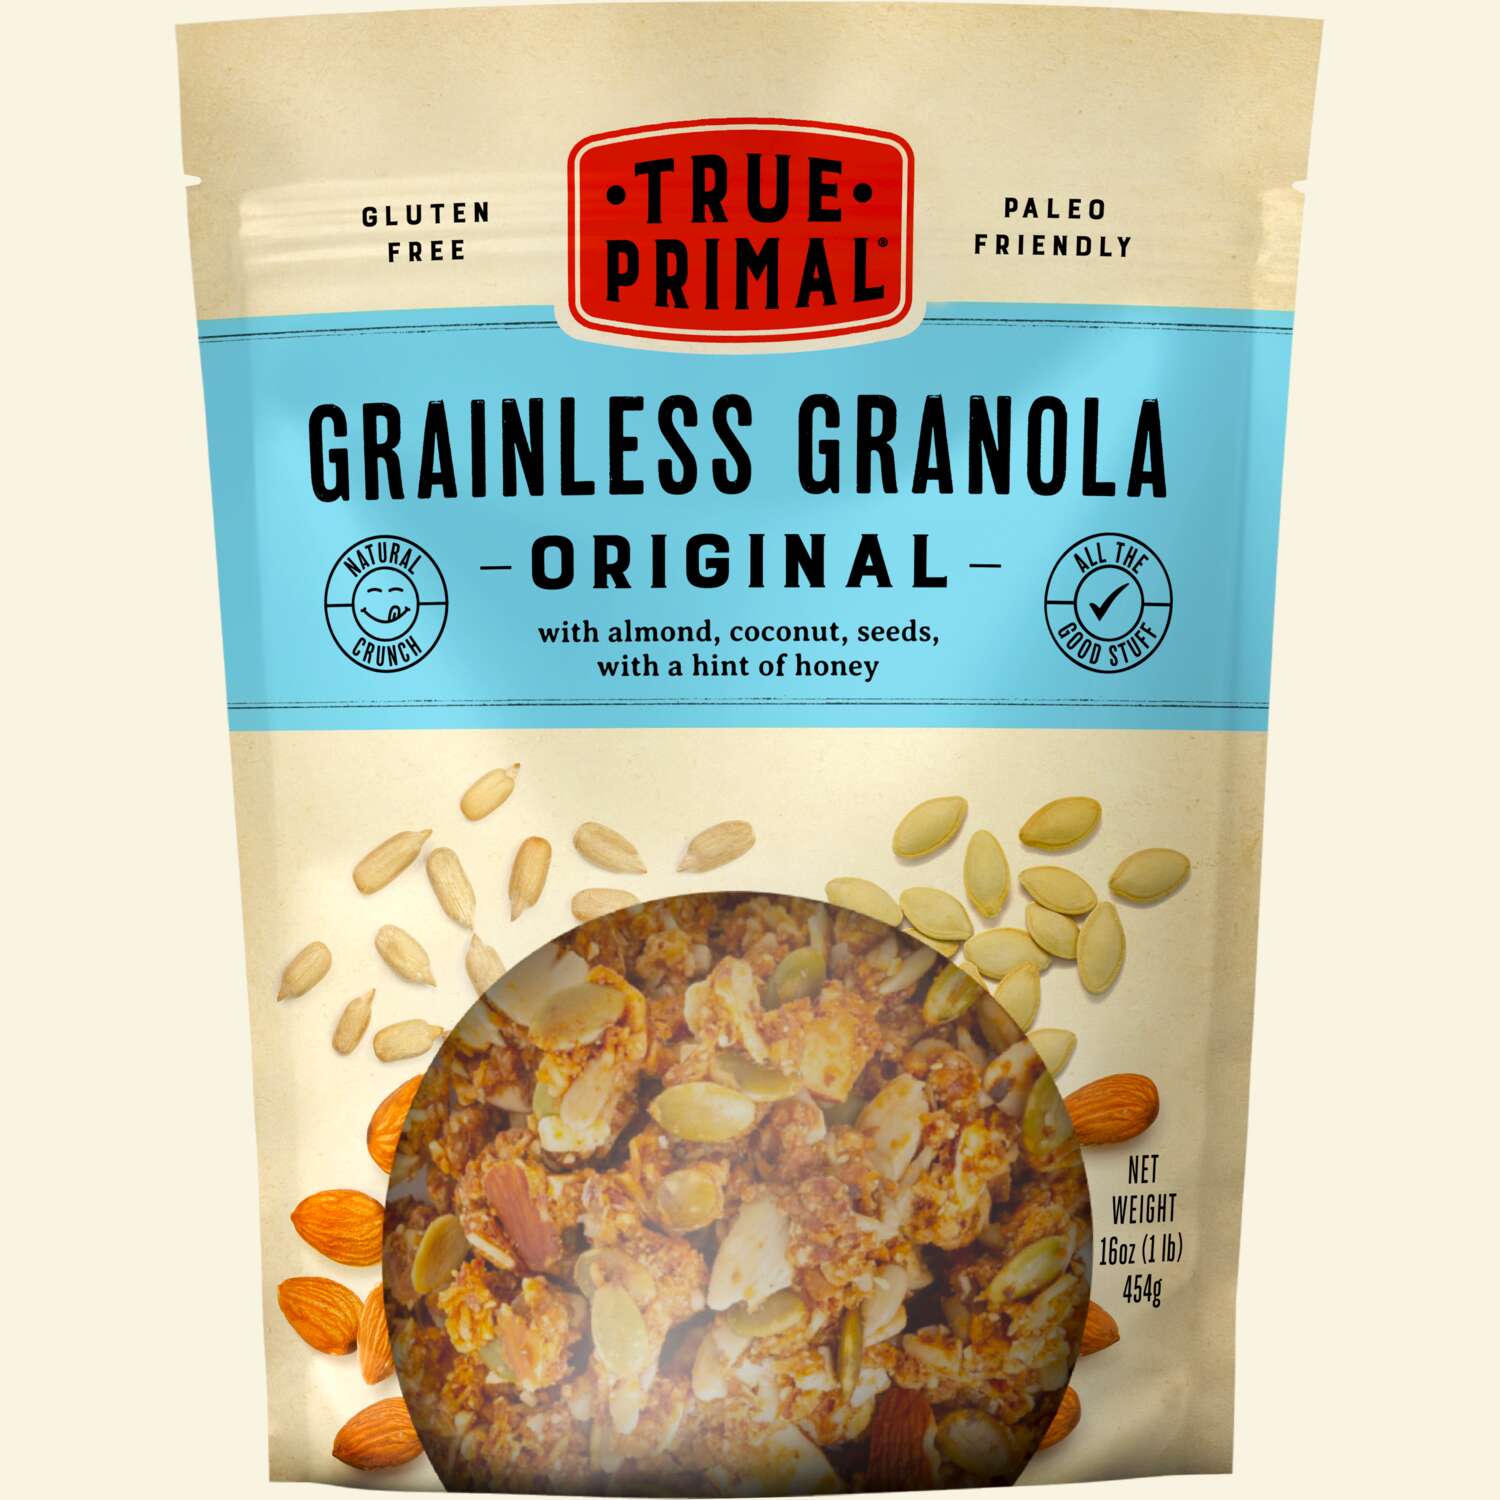 Grainless Granola Original in pouch, front